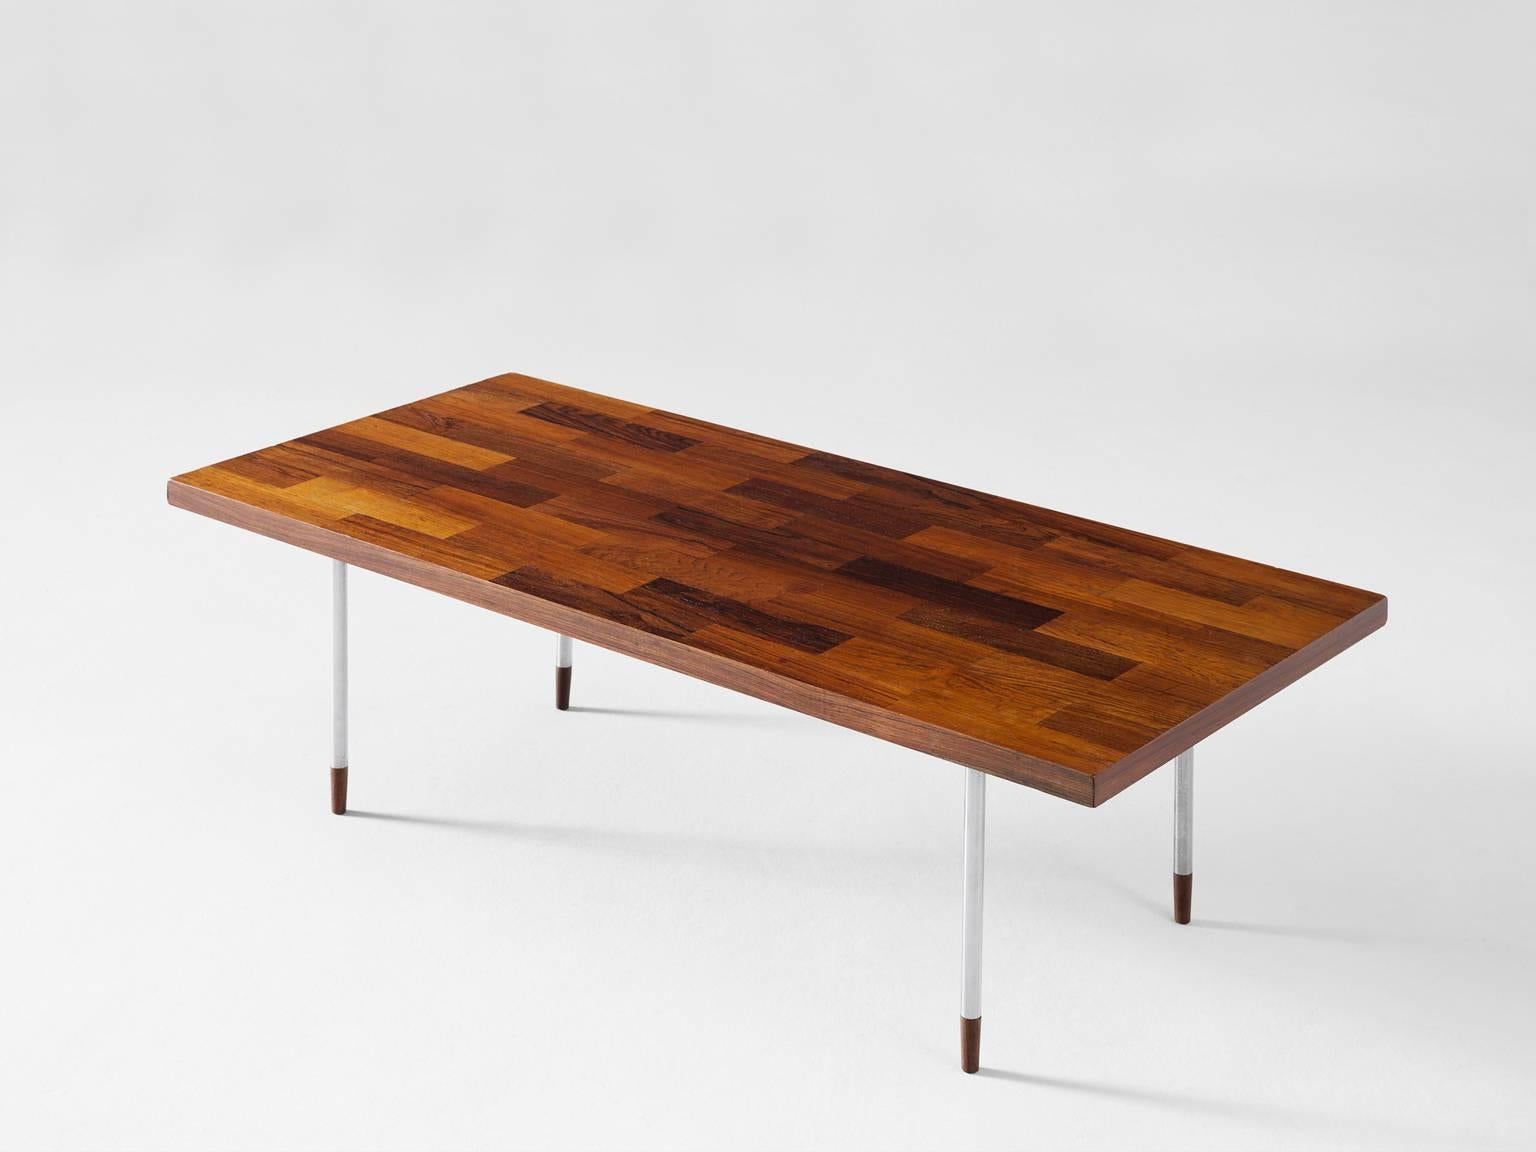 Rectangular coffee table, in rosewood and stainless steel, Denmark 1960s.

The rectangular top is made with rosewood veneer slats, in wonderful different tones. The warm expression of the basic top beautifully contrasts to the thin tubular steel